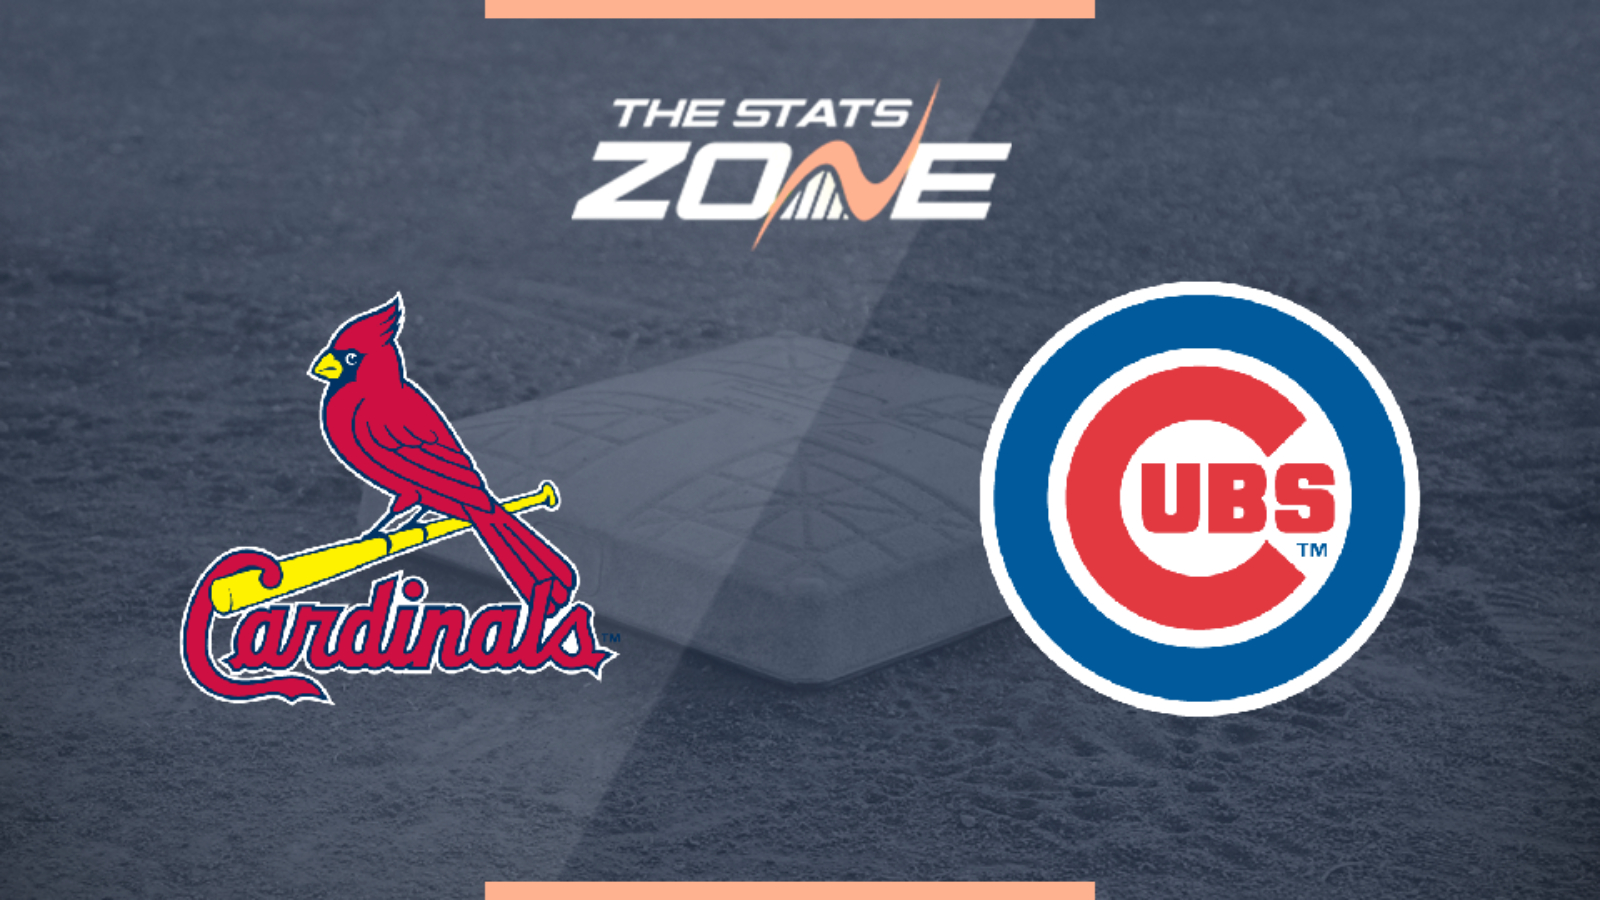 2019 MLB – St. Louis Cardinals @ Chicago Cubs Preview & Prediction - The Stats Zone